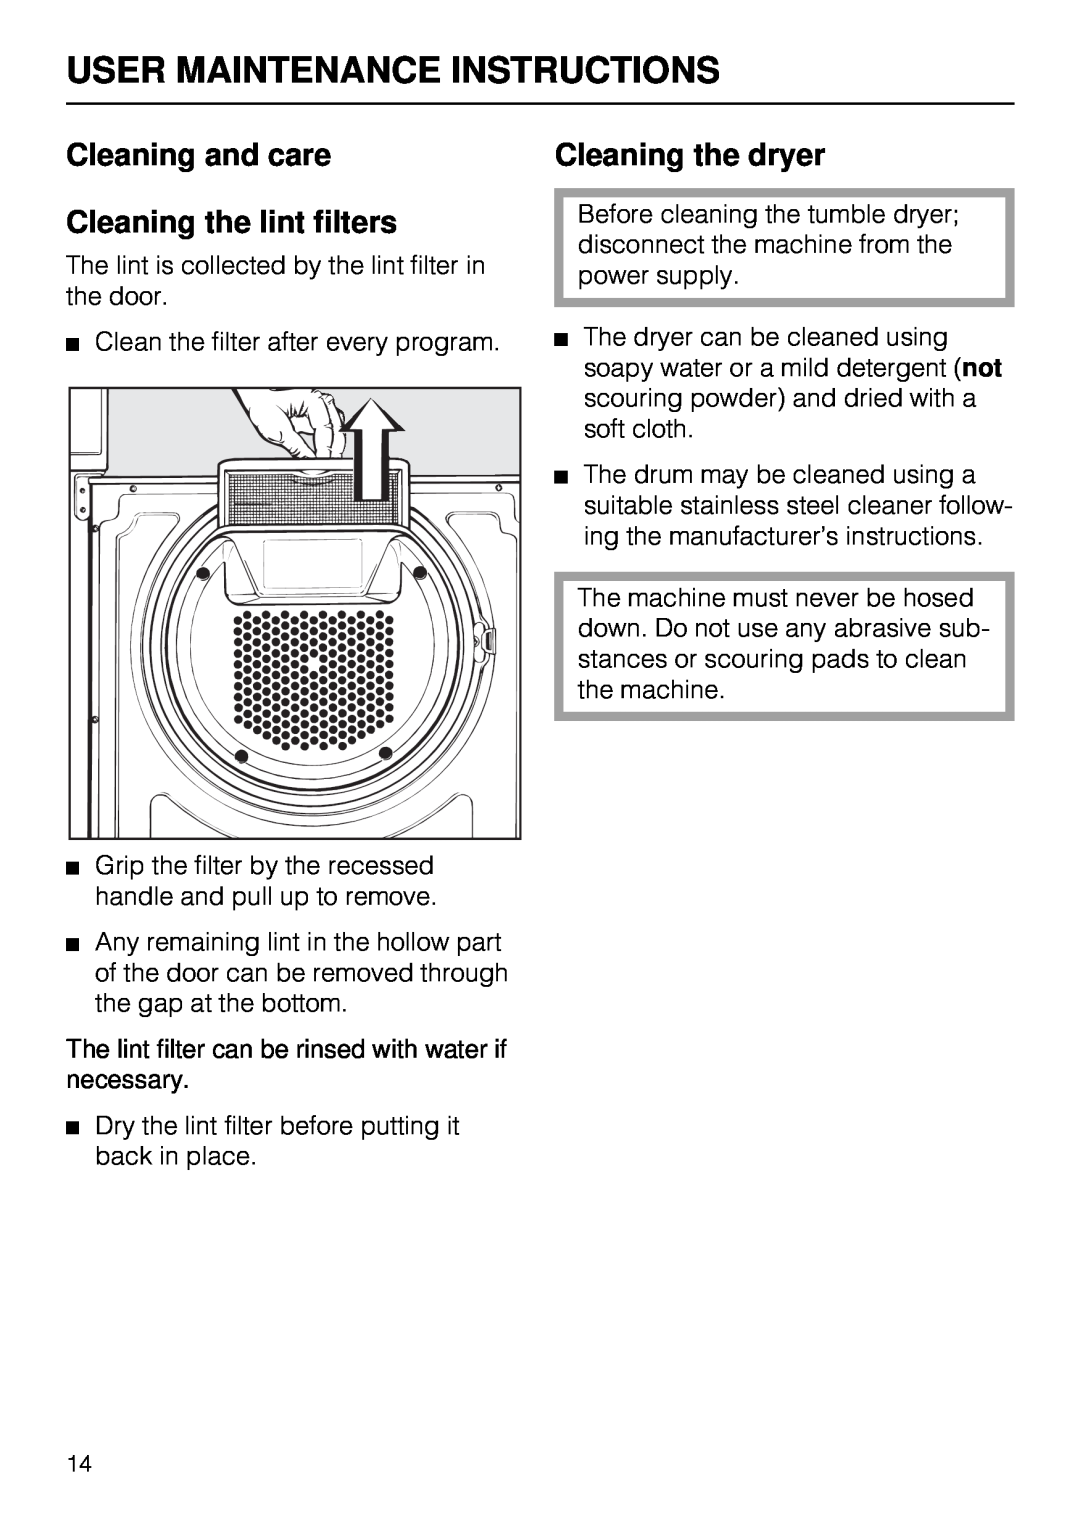 Miele T 1515 User Maintenance Instructions, Cleaning and care Cleaning the lint filters, Cleaning the dryer 